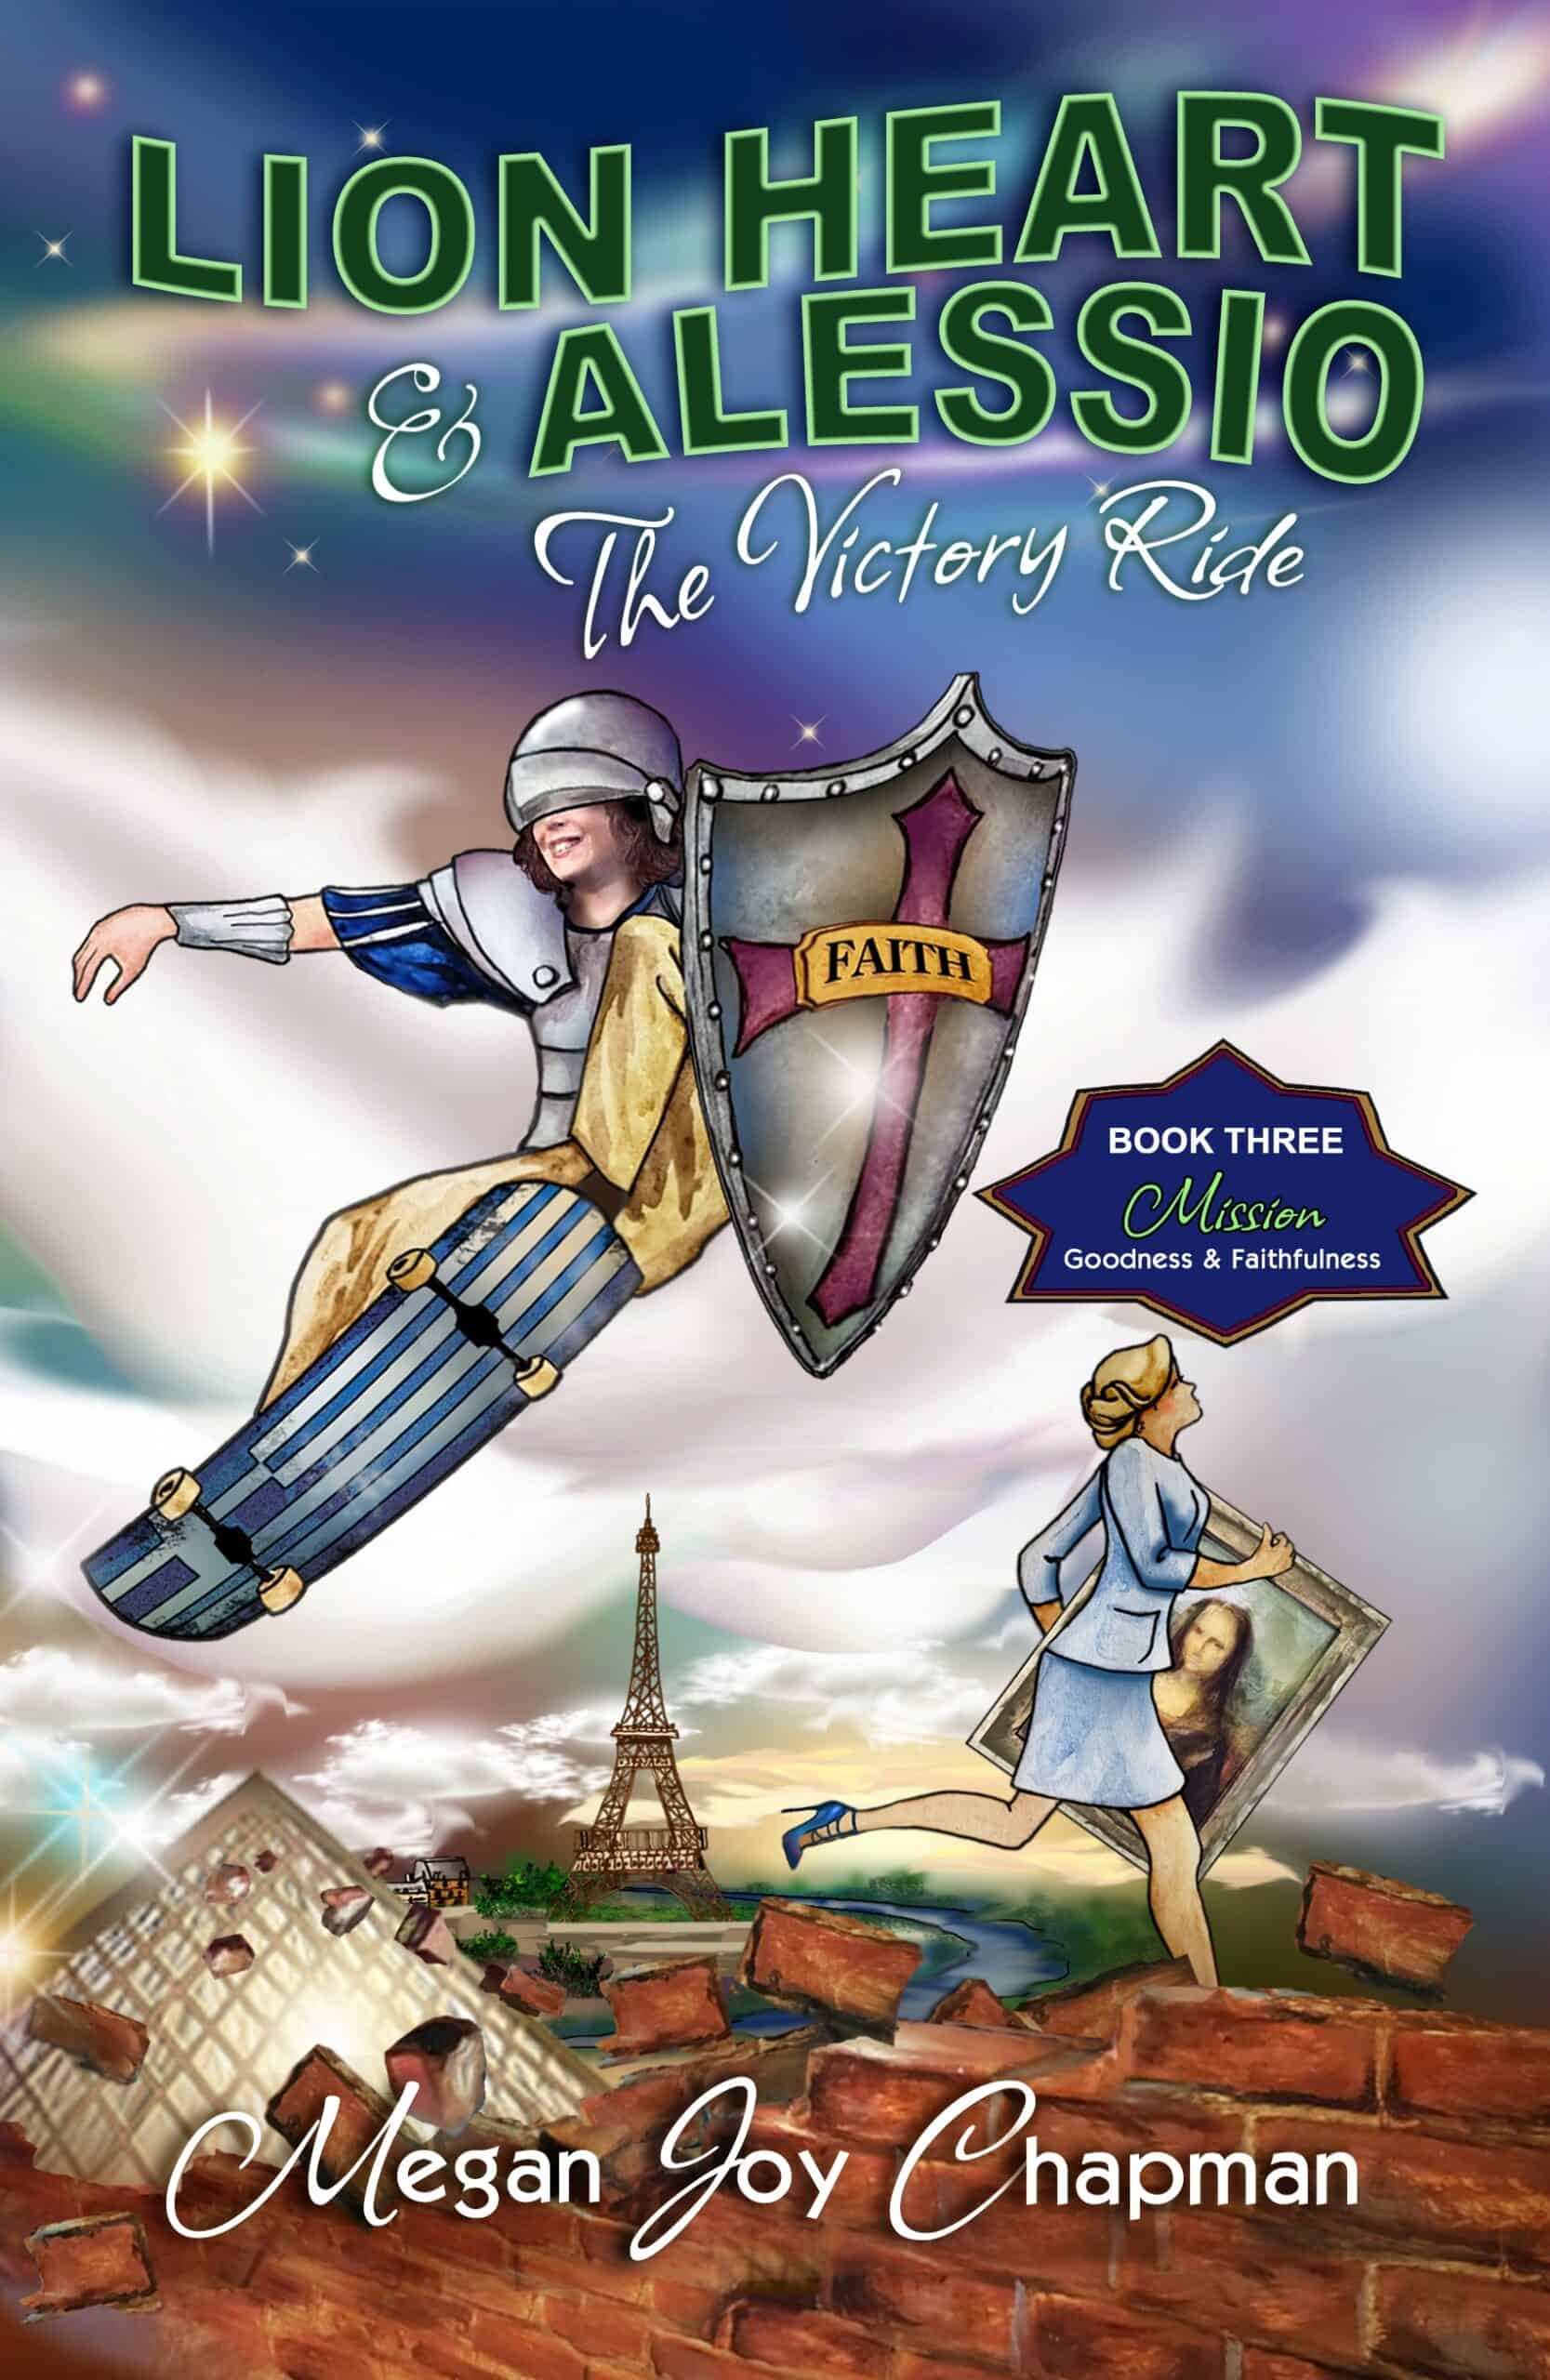 Lion Heart & Alessio: The Victory Ride Book Three: Mission Goodness & Faithfulness